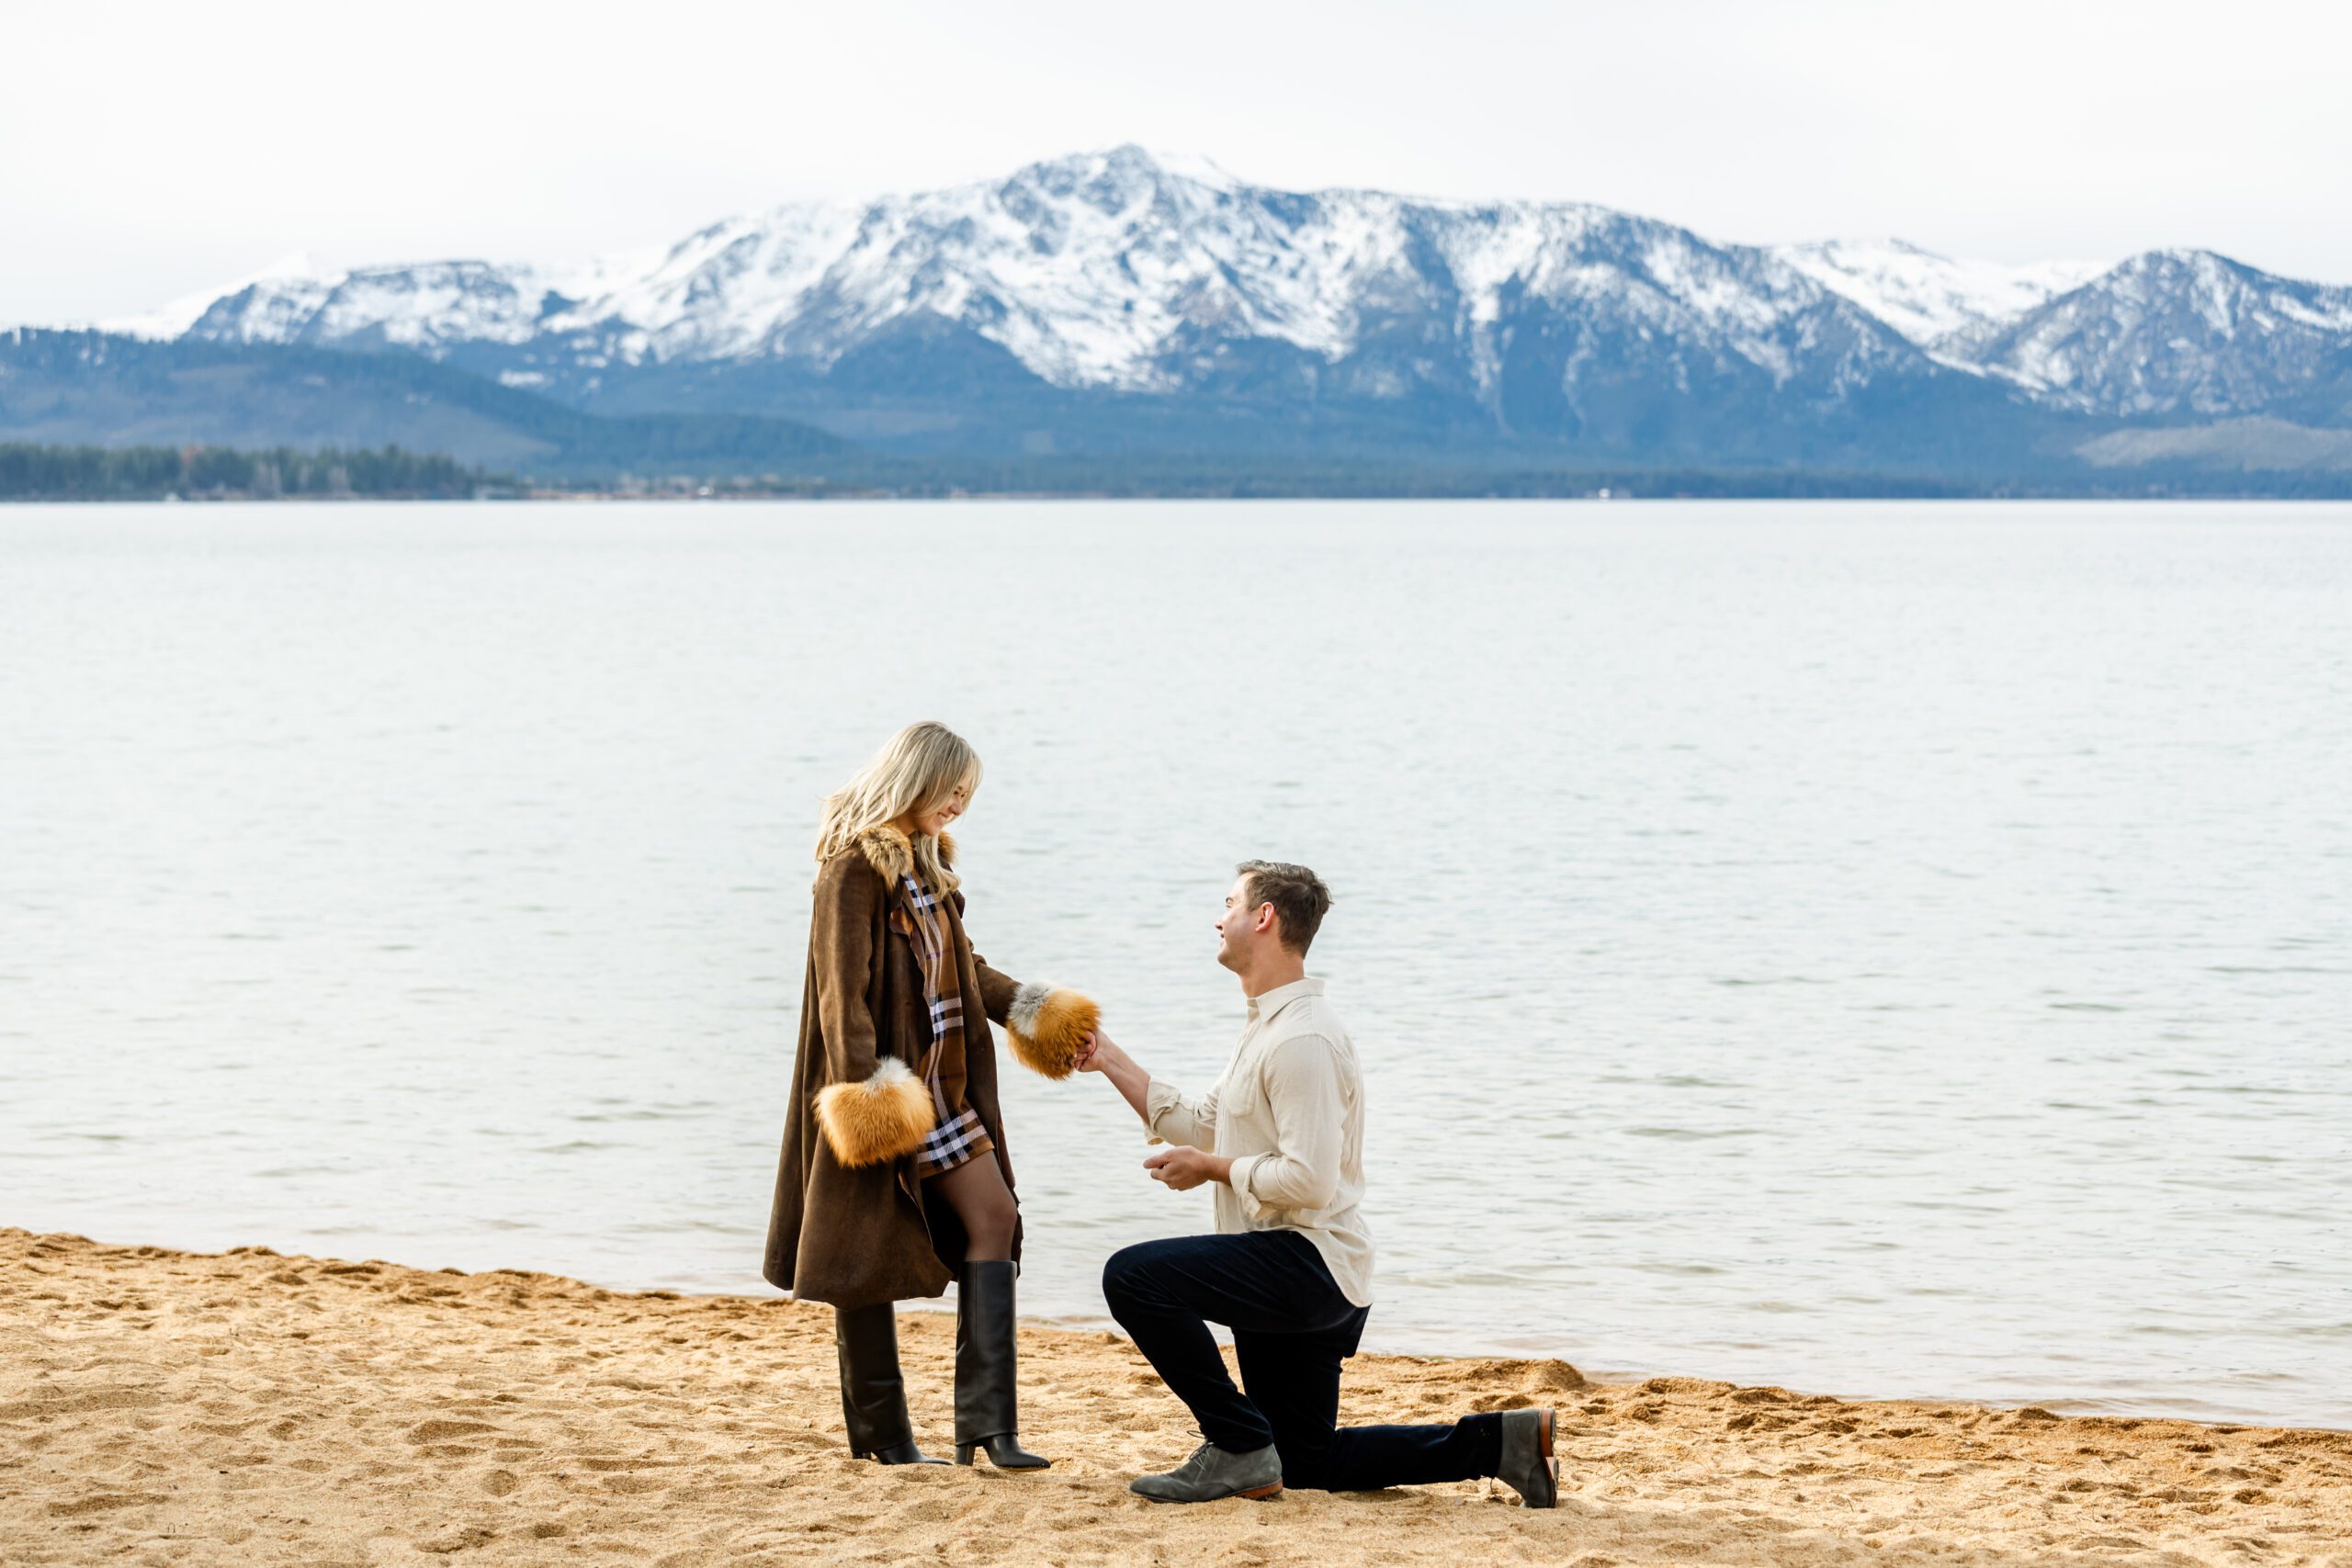 man proposing to girlfriend on the beach in lake tahoe at edgewood in the winter.